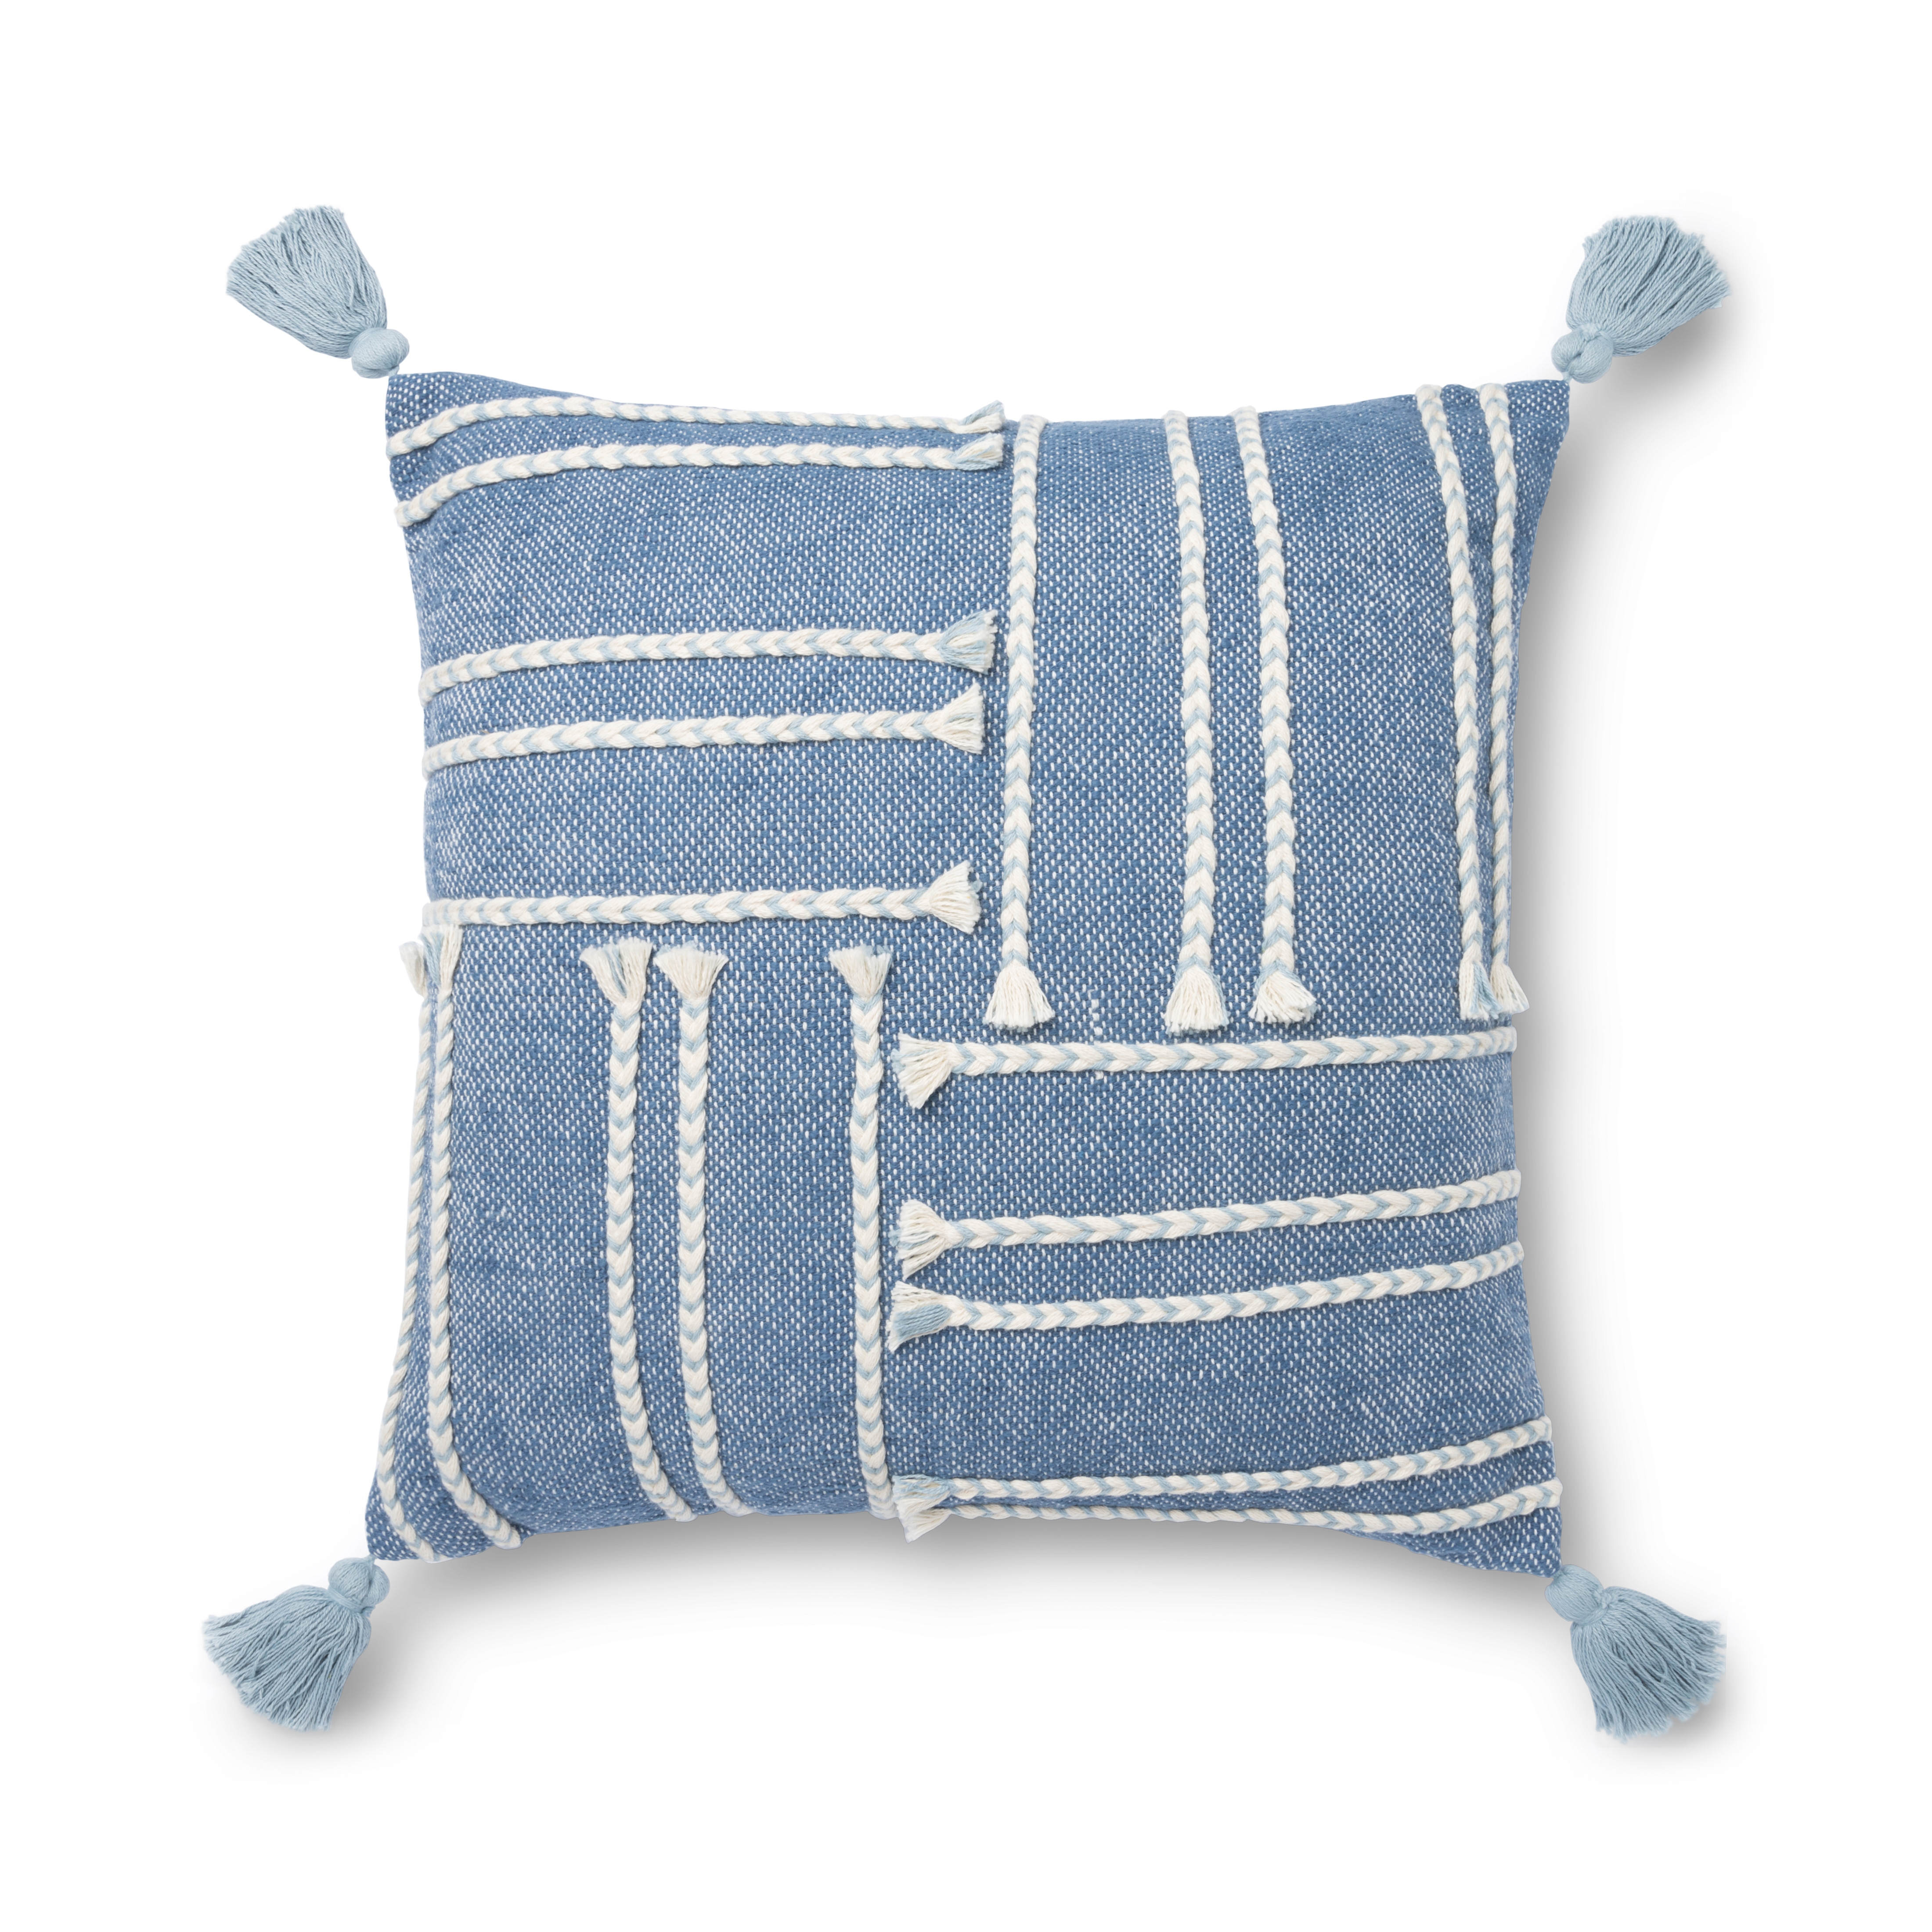 ED Ellen DeGeneres Crafted by Loloi Pillows P4117 Blue / White 18" x 18" Cover Only - Image 0